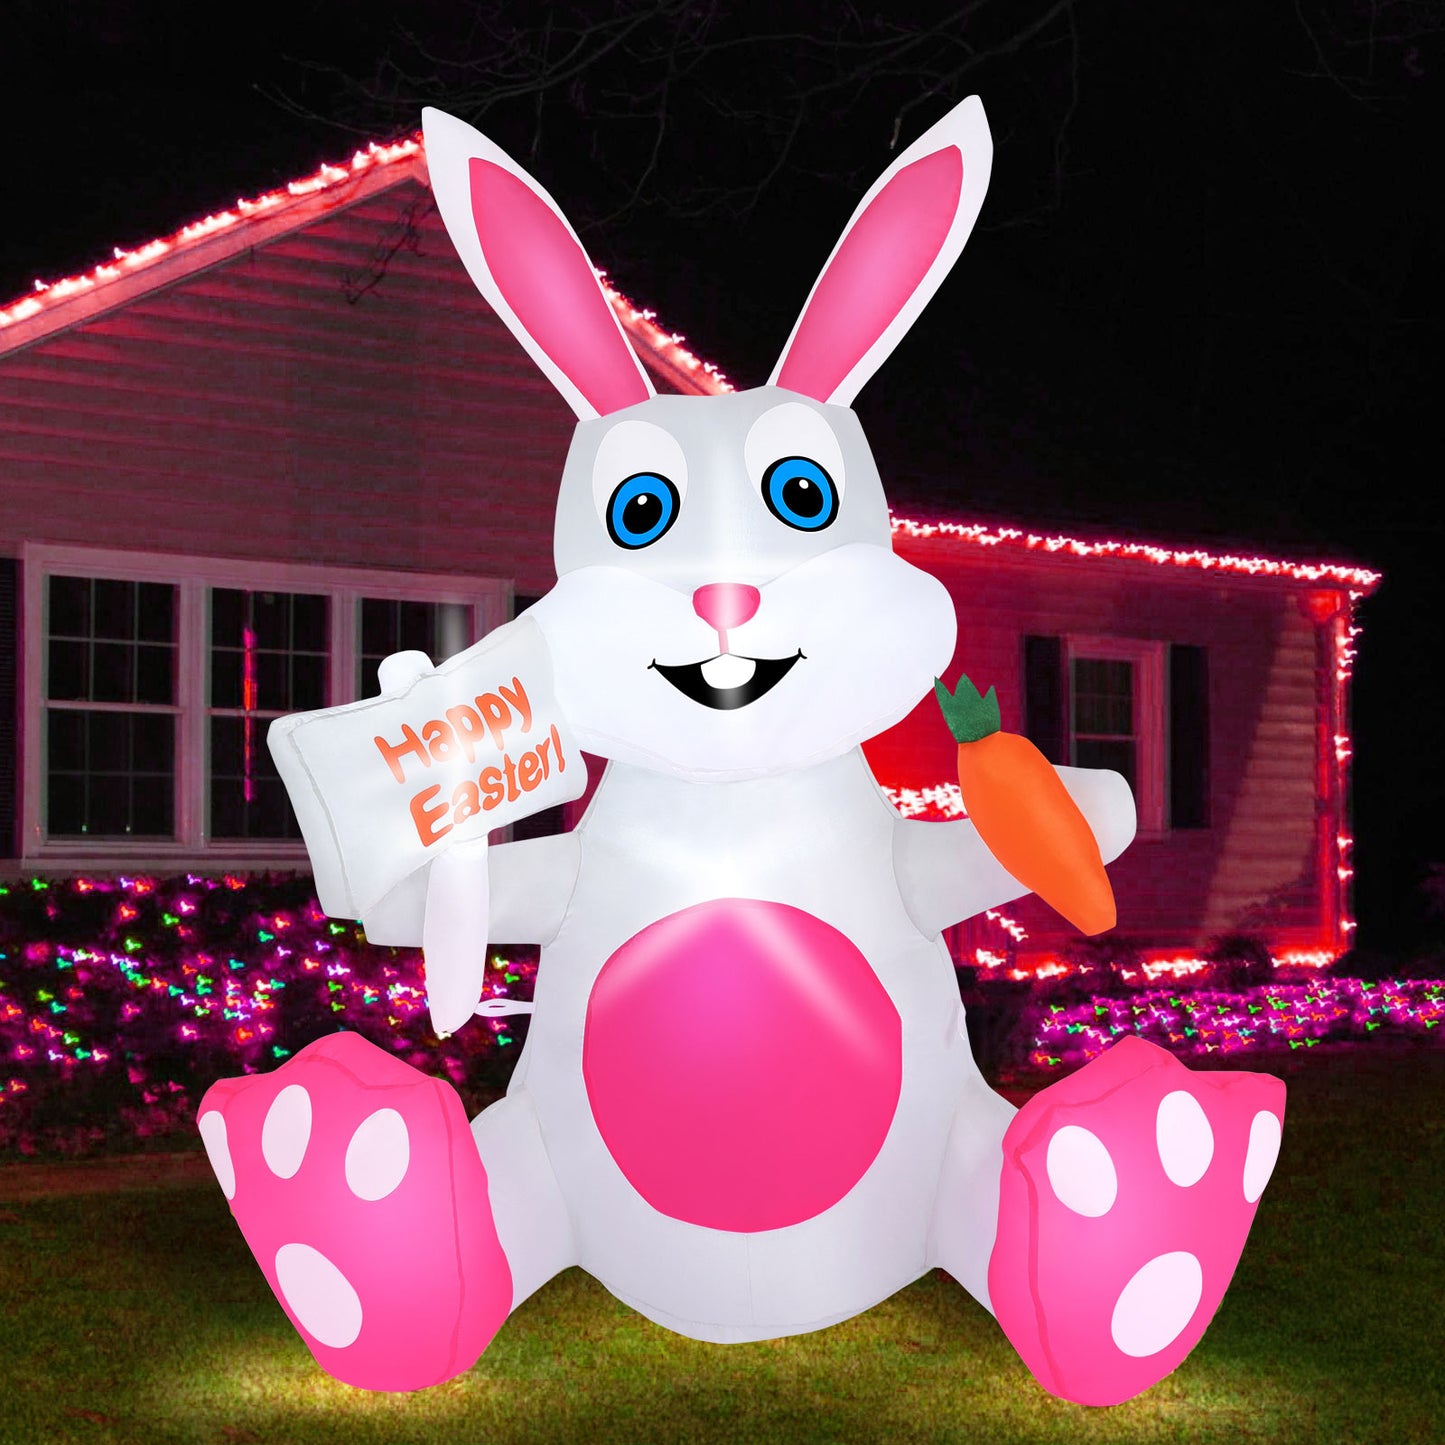 4FT Inflatable Easter Bunny with Built-in LED lights, Easter Bunny Inflatable Outdoor Decorations for Lawn, Yard and Garden Decor